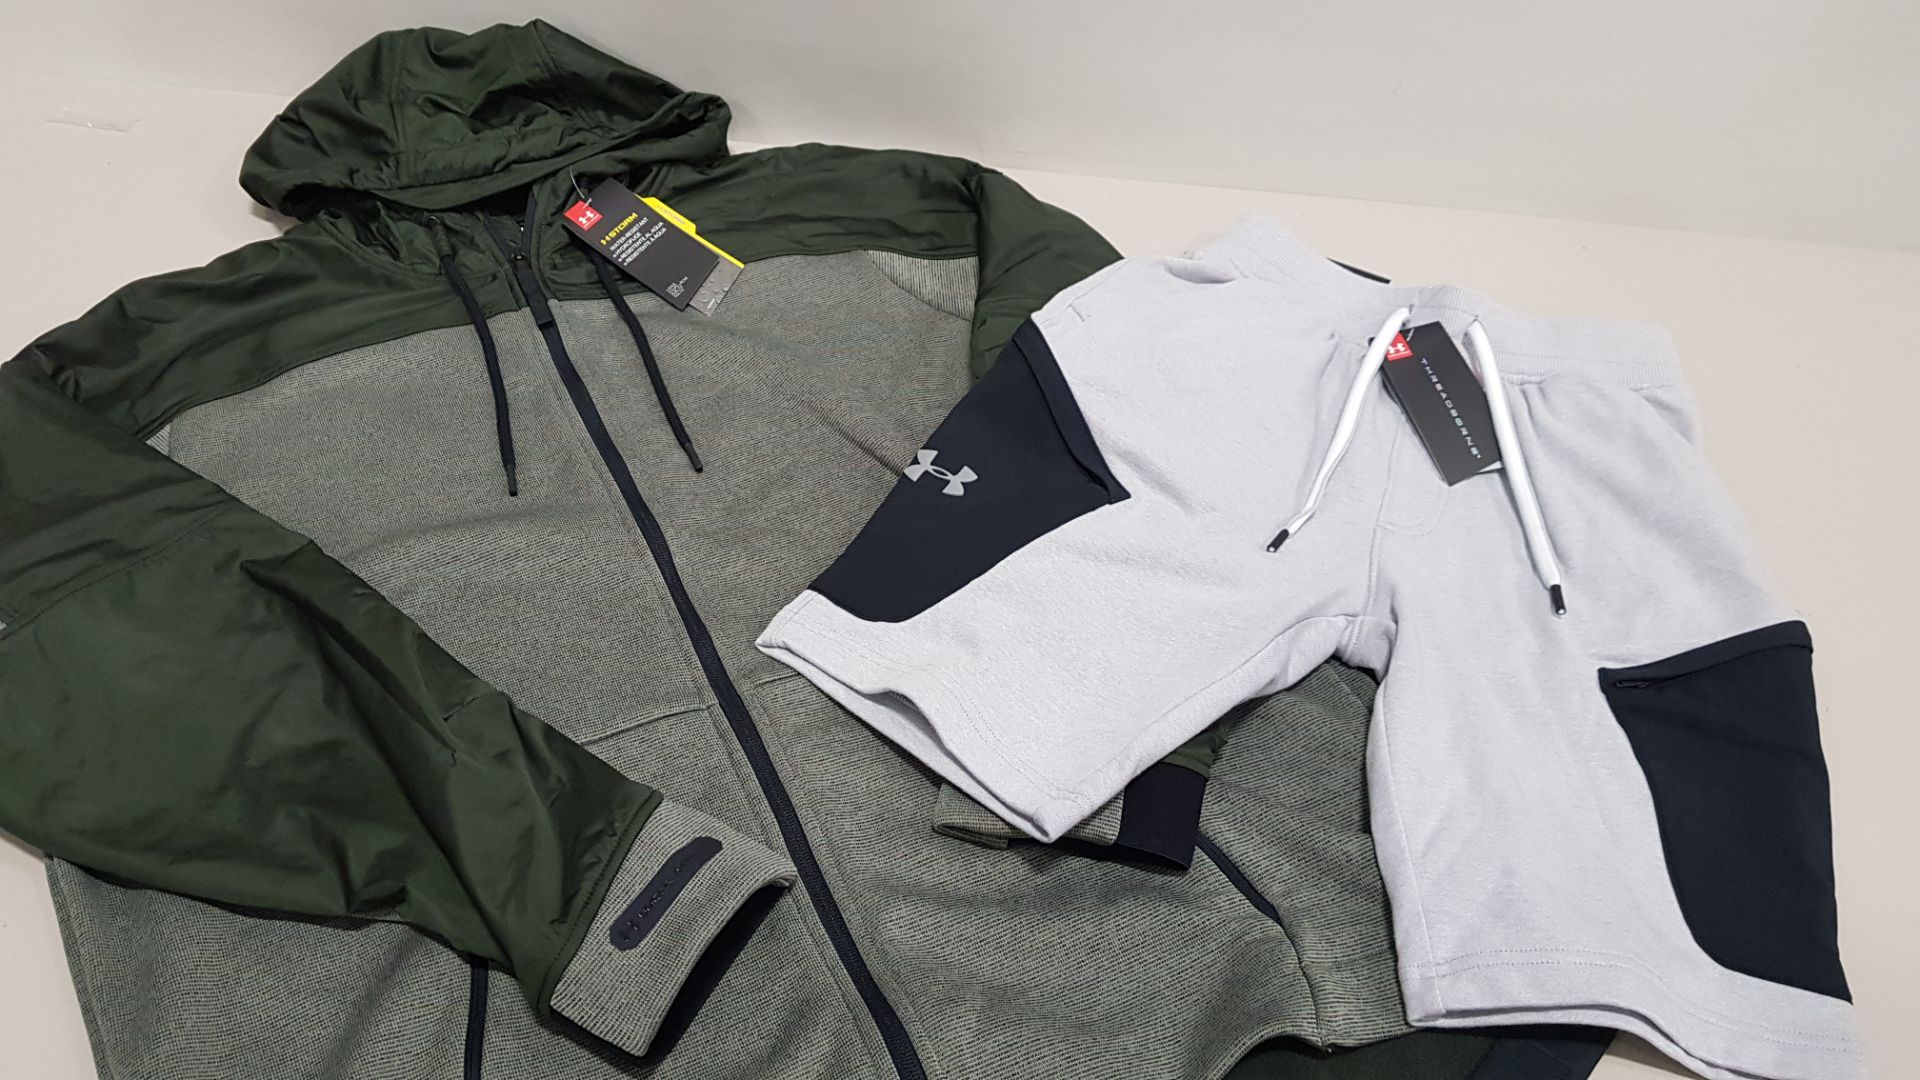 8 PIECE MIXED UNDER ARMOUR LOT TO INCLUDE 7 X MENS UA GREY WITH BLACK PATCH SHORTS - SIZE XS 1 X